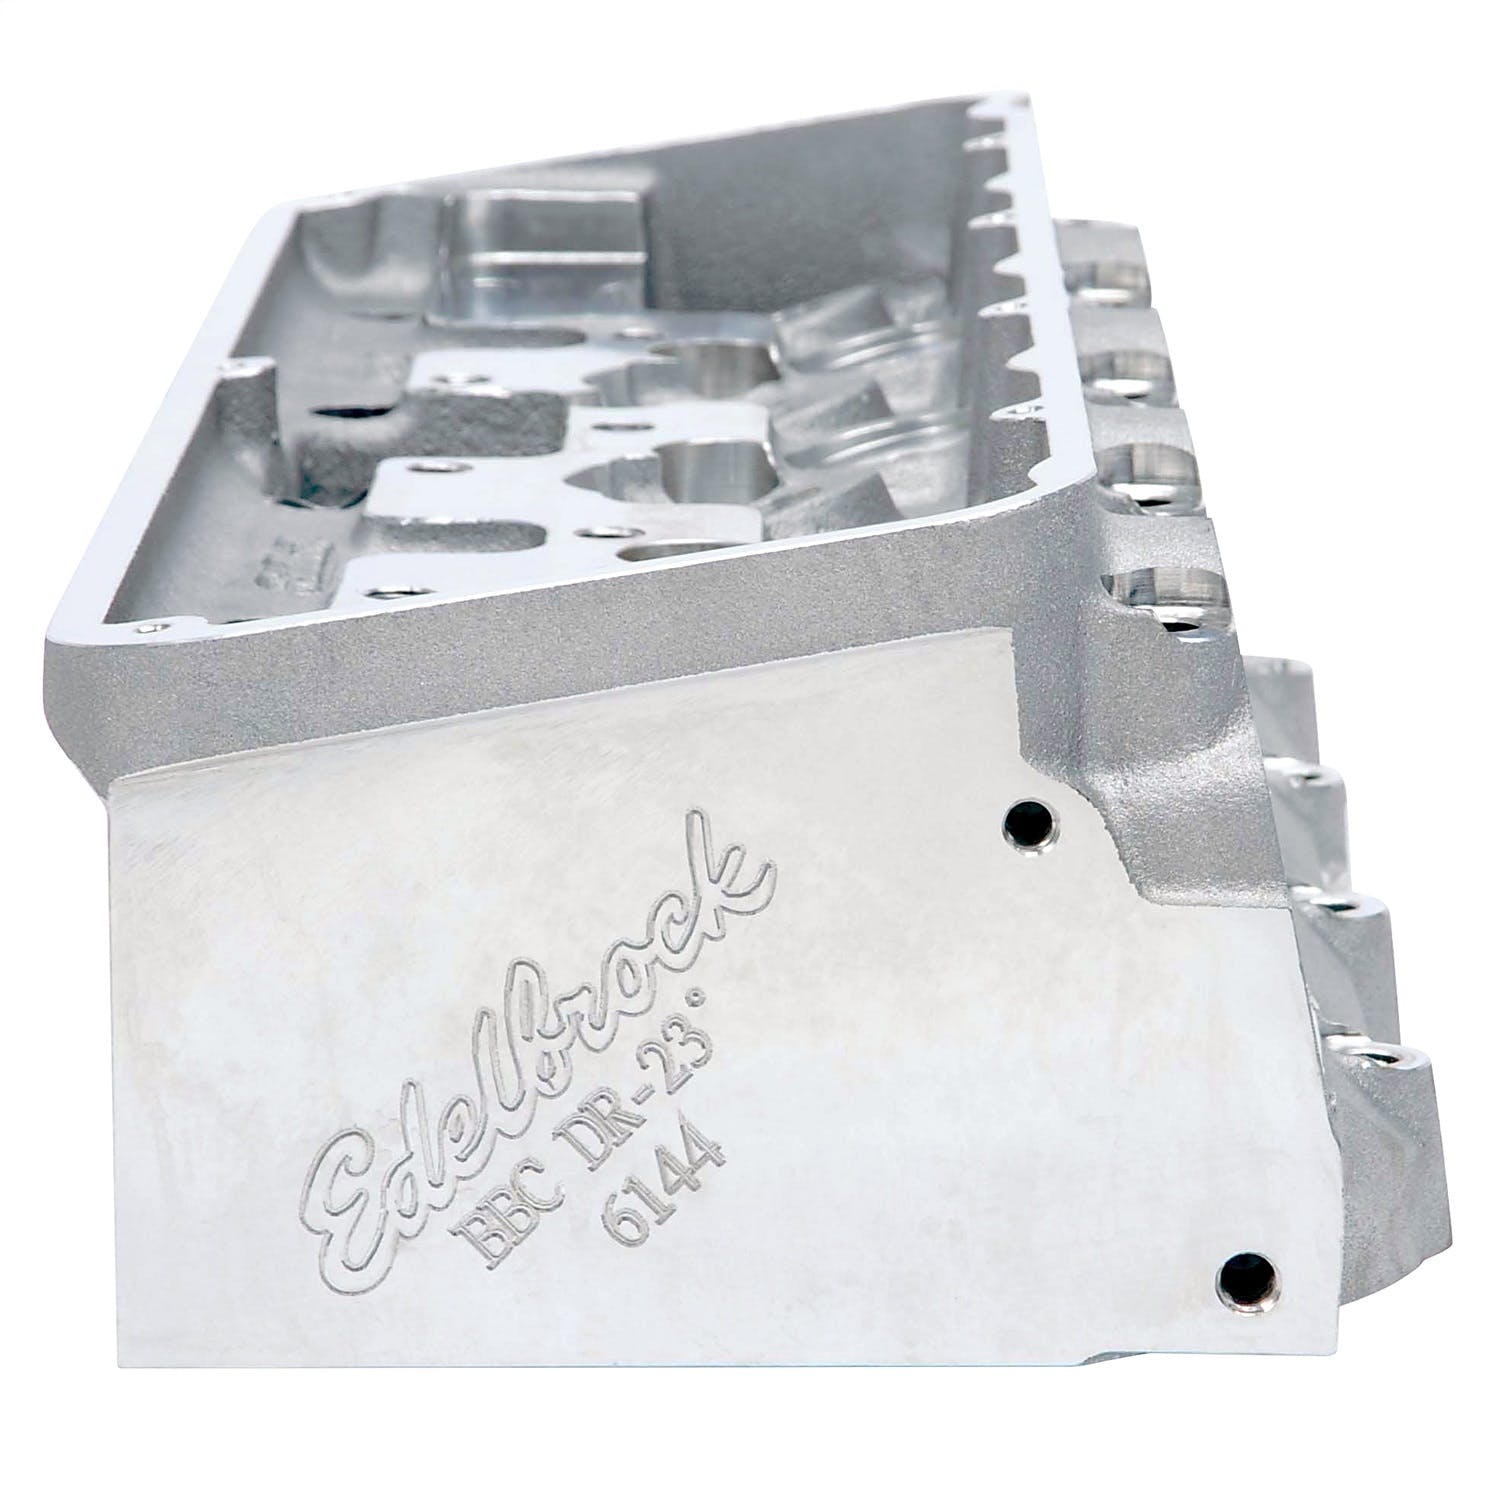 Edelbrock 614469 CYL HEAD BBC PRO PORT VICTOR HIGH PORT CONVENTIONAL DR-23 HIPd PRO PORT RAW